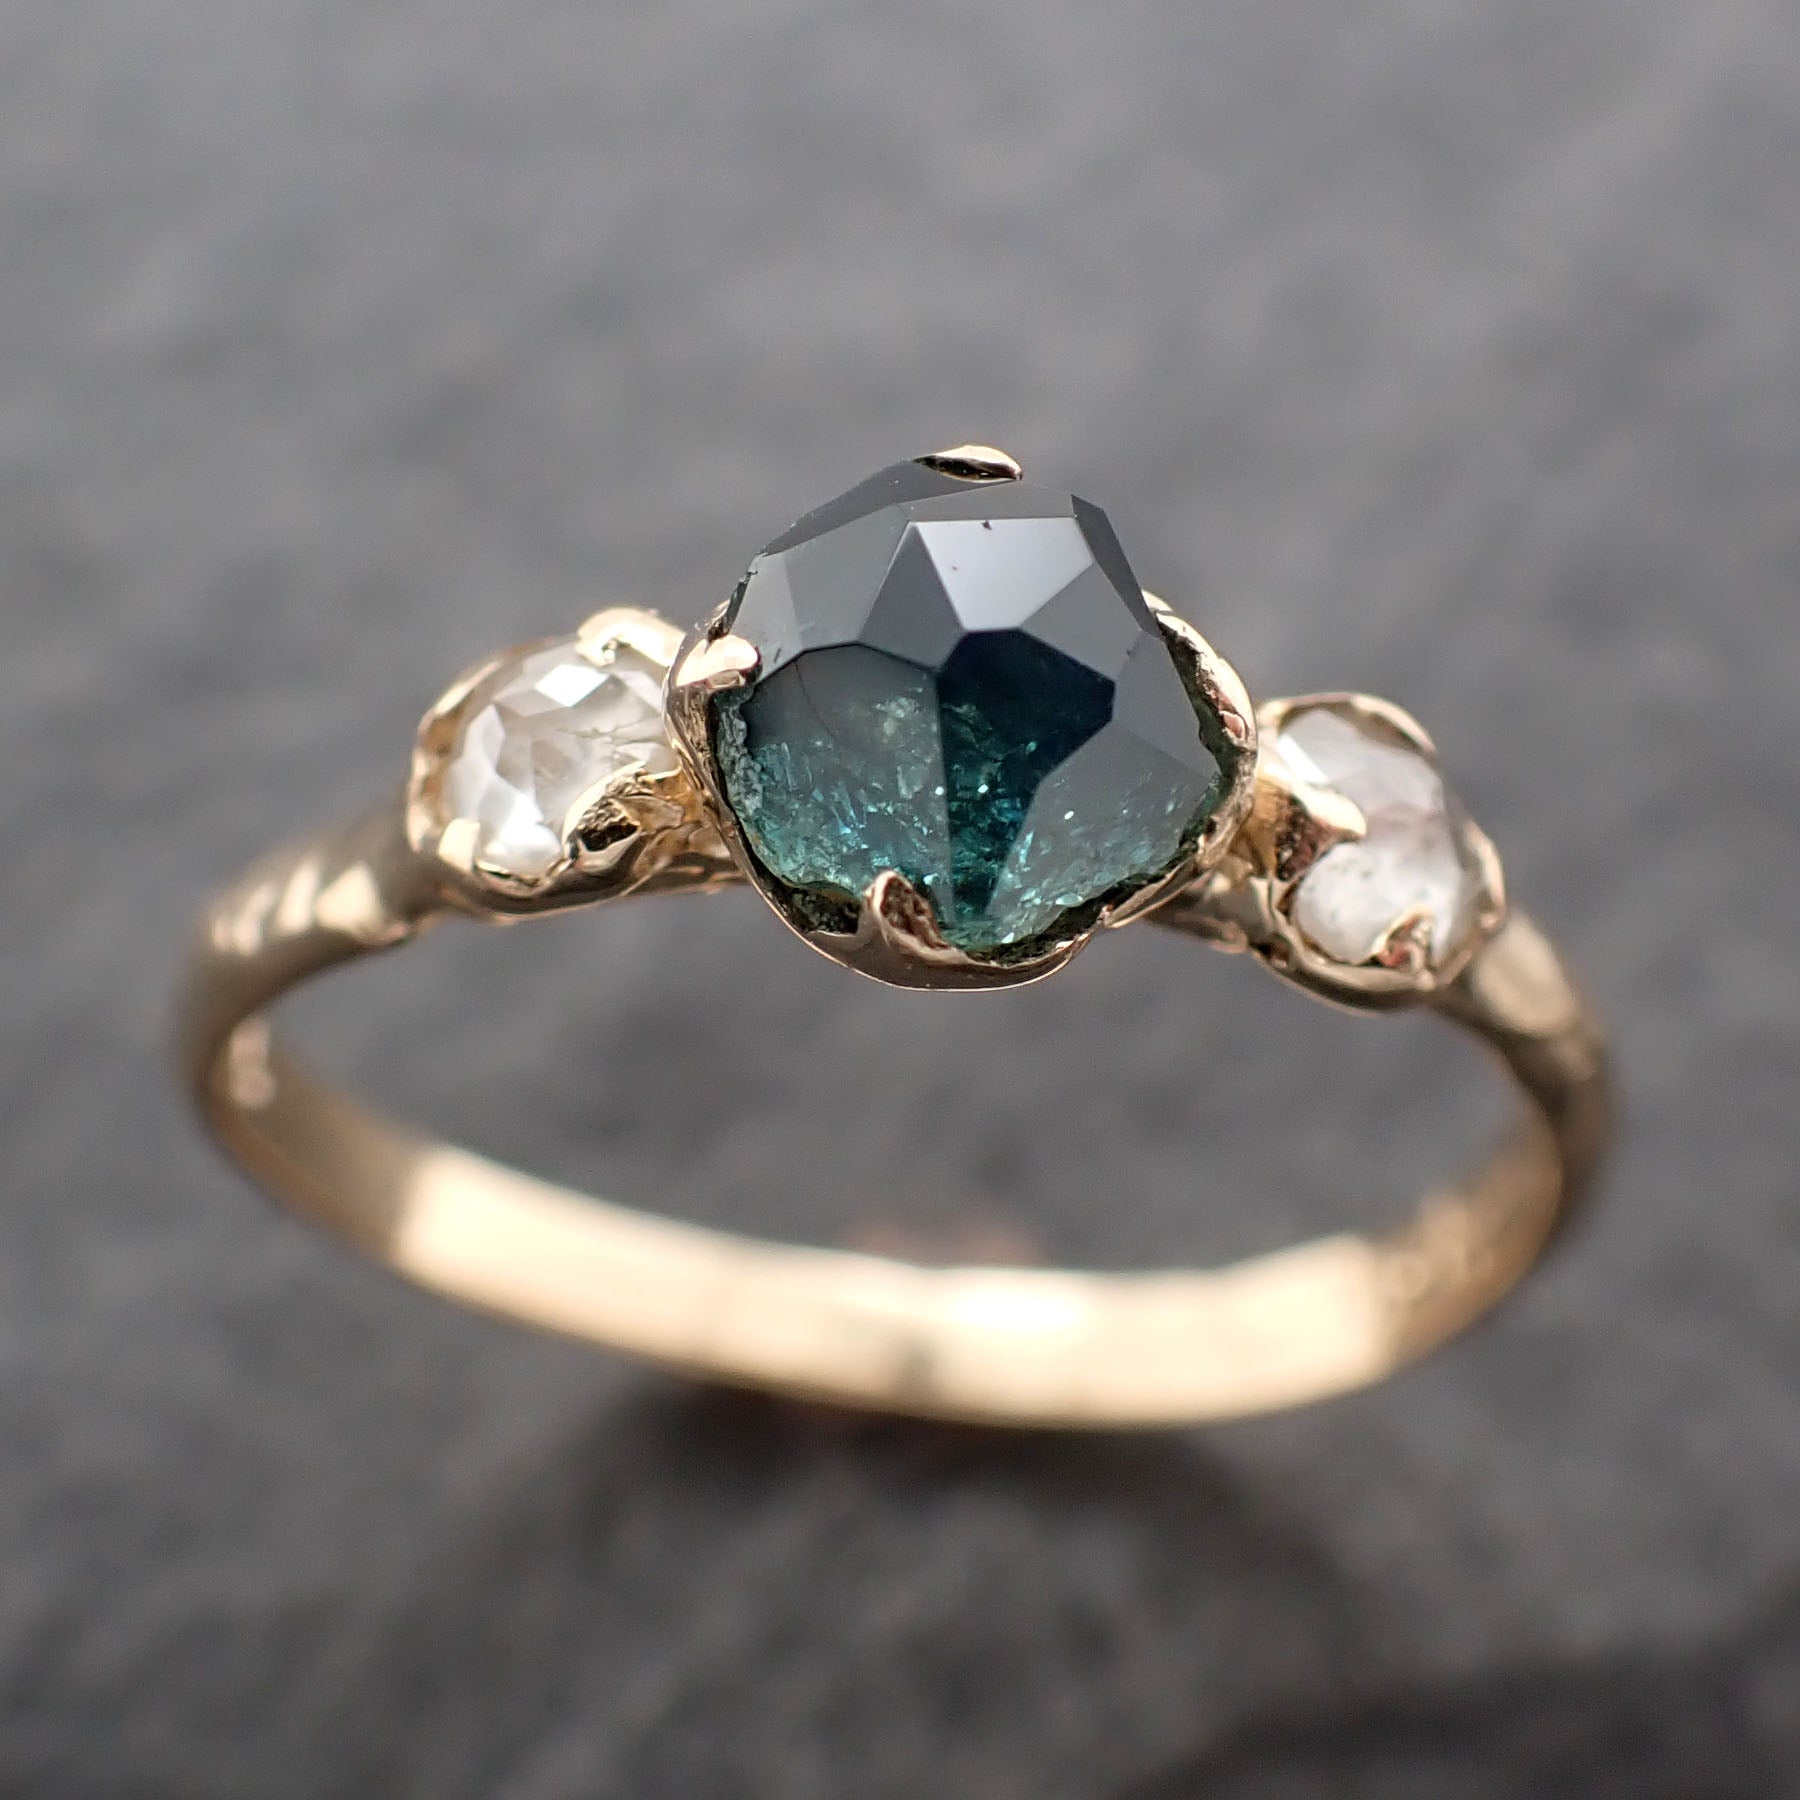 Partially faceted blue Montana Sapphire and fancy Diamonds 14k Yellow Gold Engagement Wedding Ring Gemstone Ring Multi stone Ring 2424